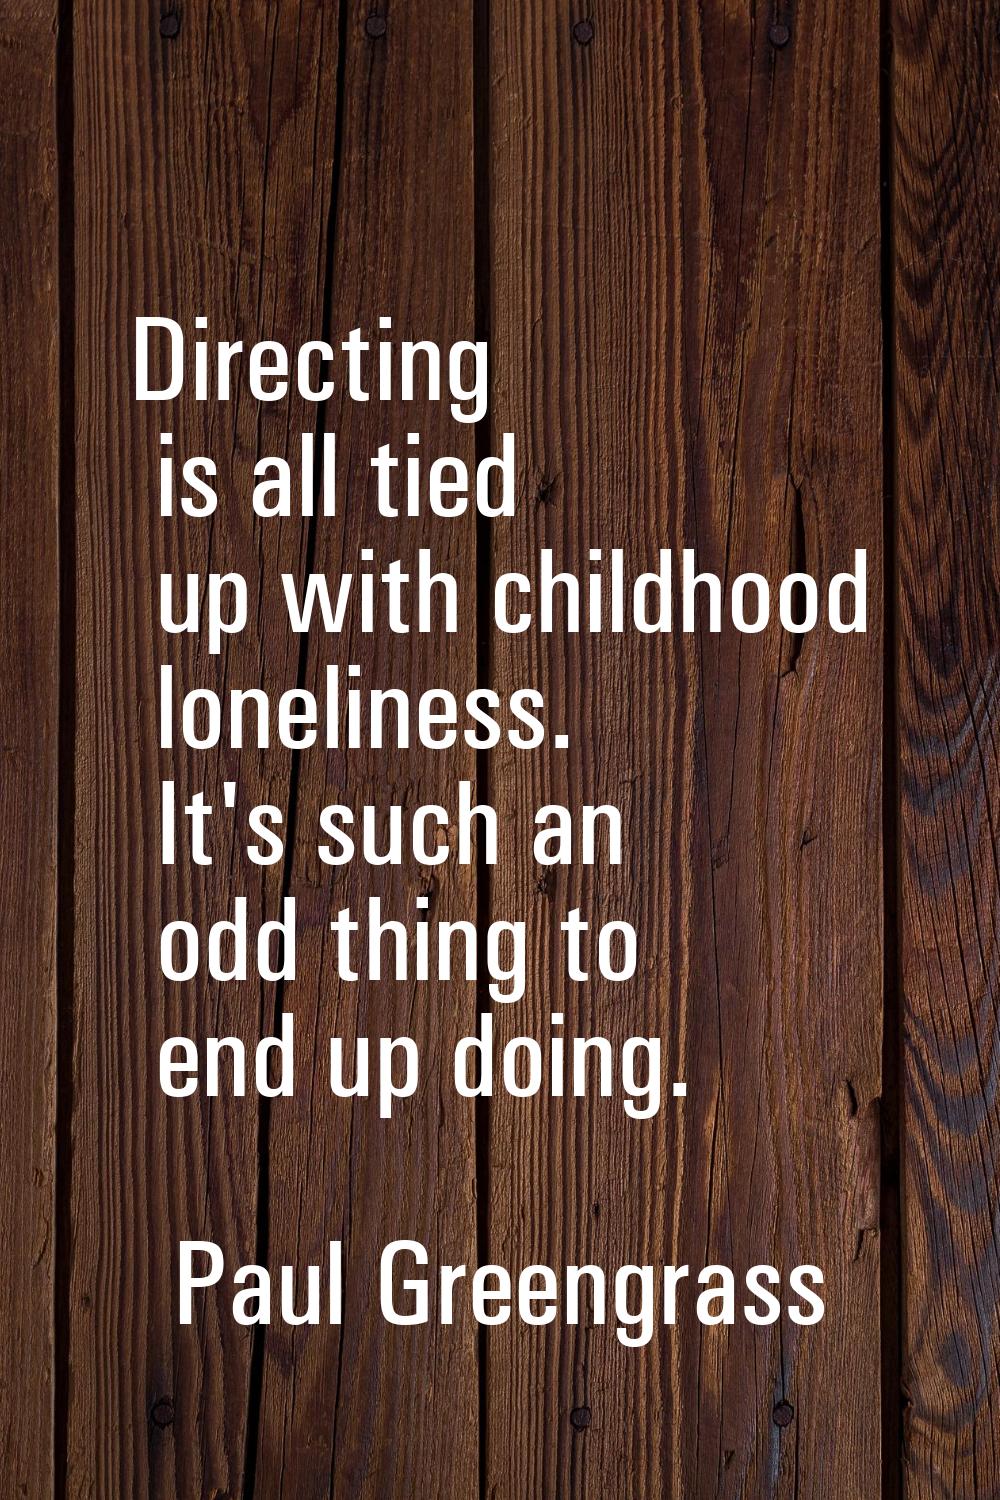 Directing is all tied up with childhood loneliness. It's such an odd thing to end up doing.